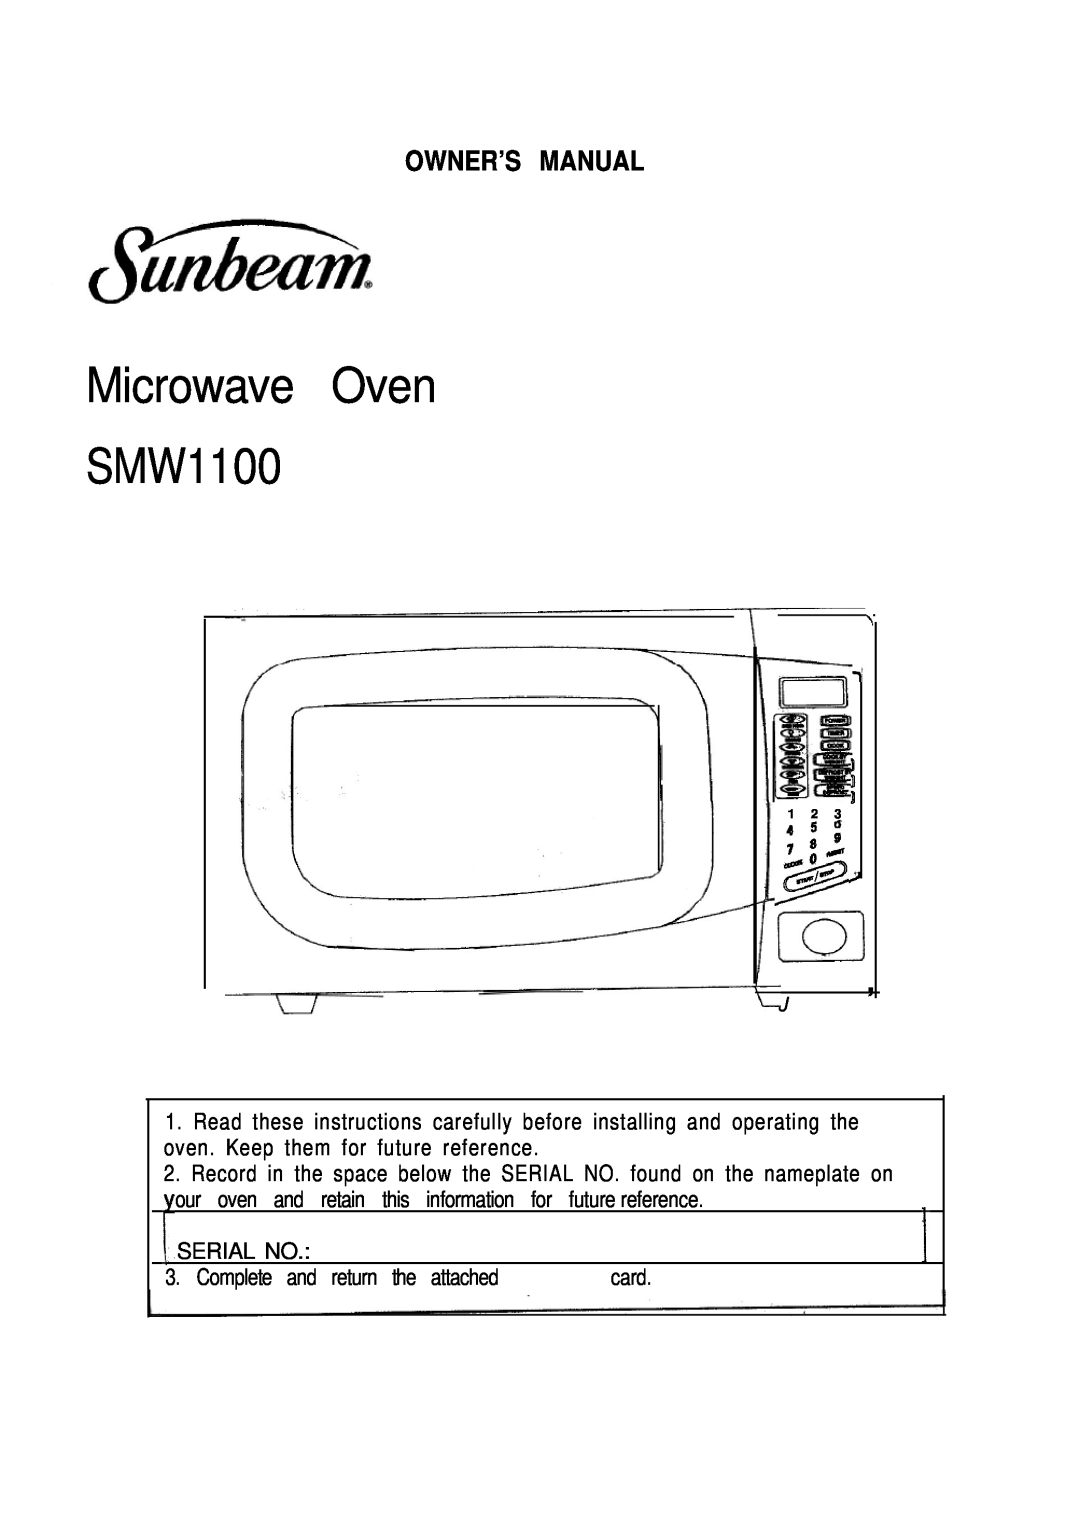 Sunbeam owner manual Microwave Oven SMW1100 